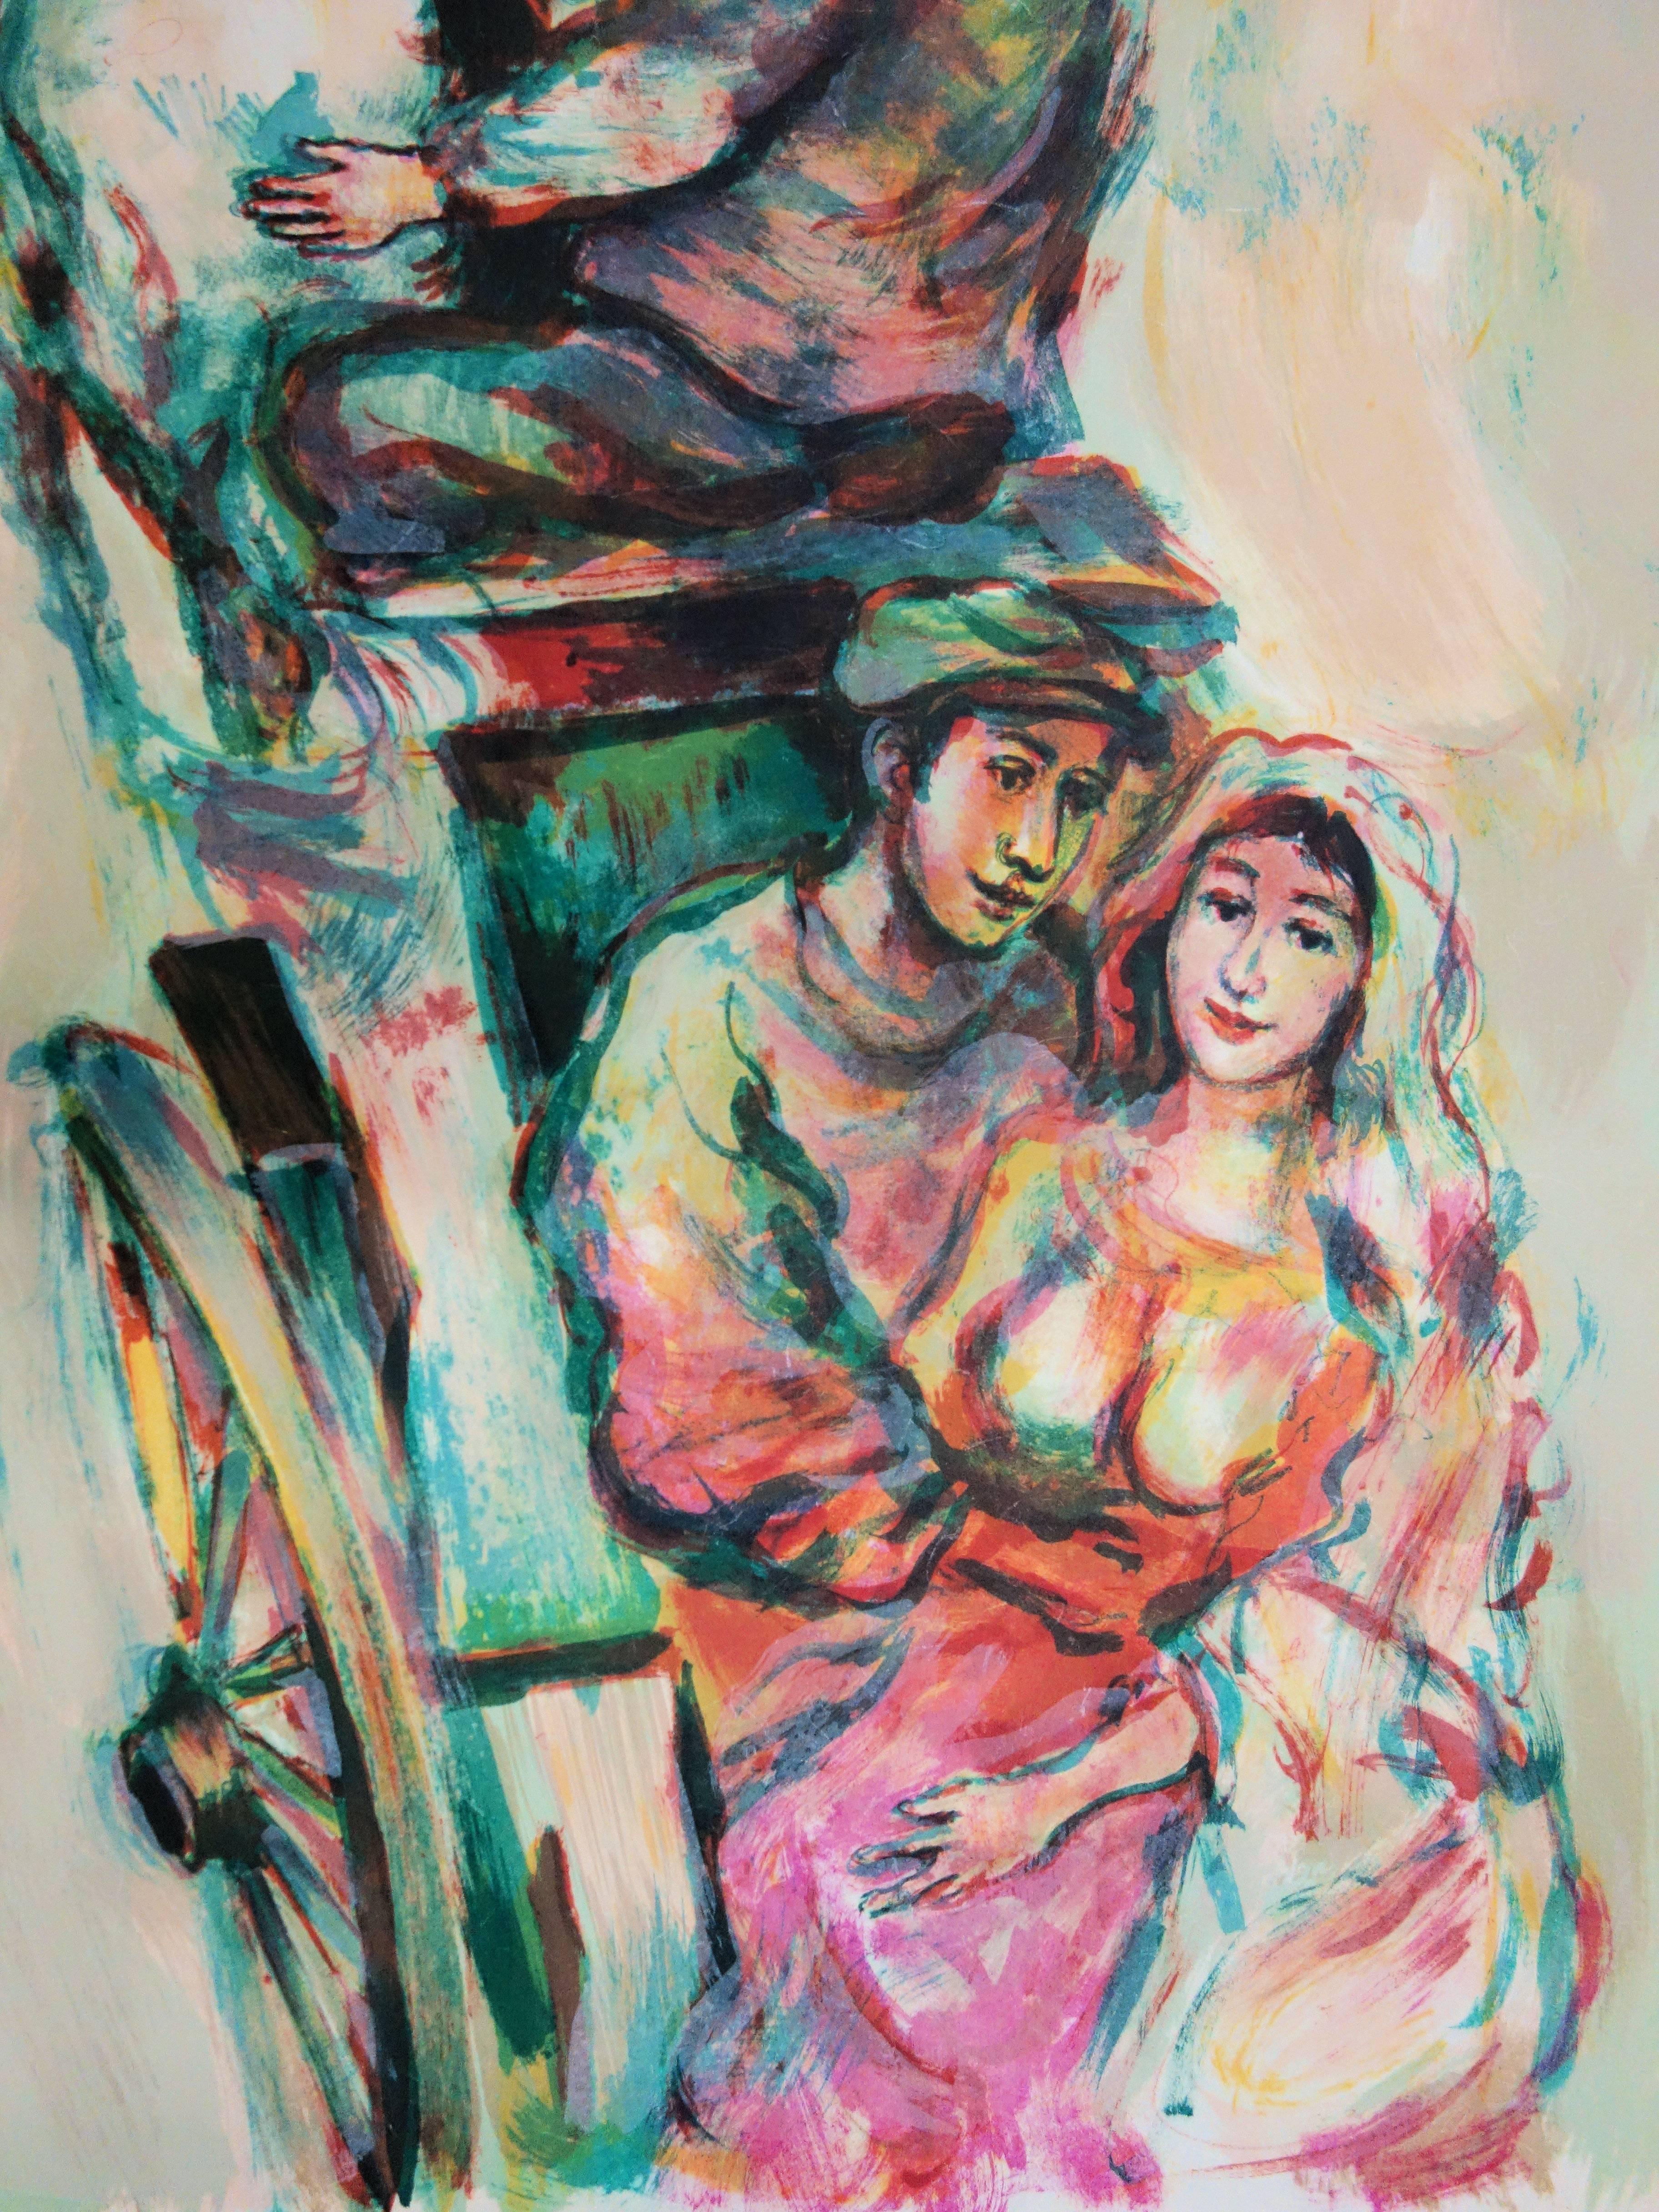 Lovers in a Carriage - Handsigned lithograph /75 ex - Modern Print by Walter Spitzer